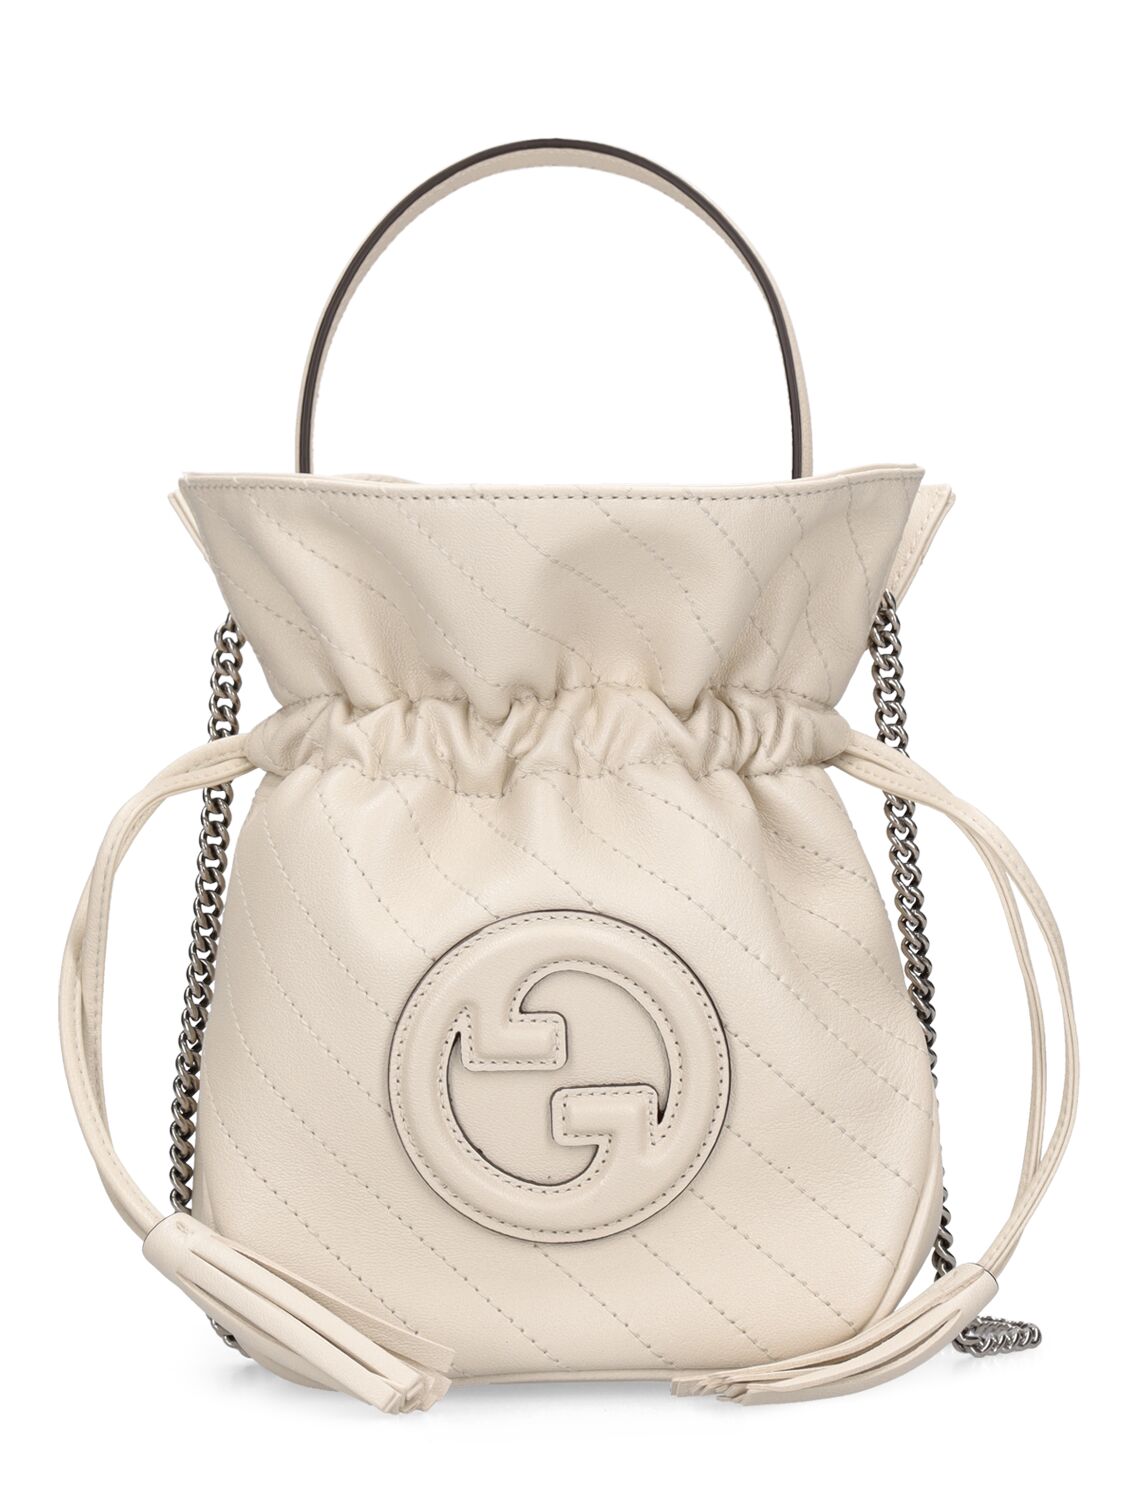 Gucci Mini Blondie Leather Bucket Bag In Mystic White